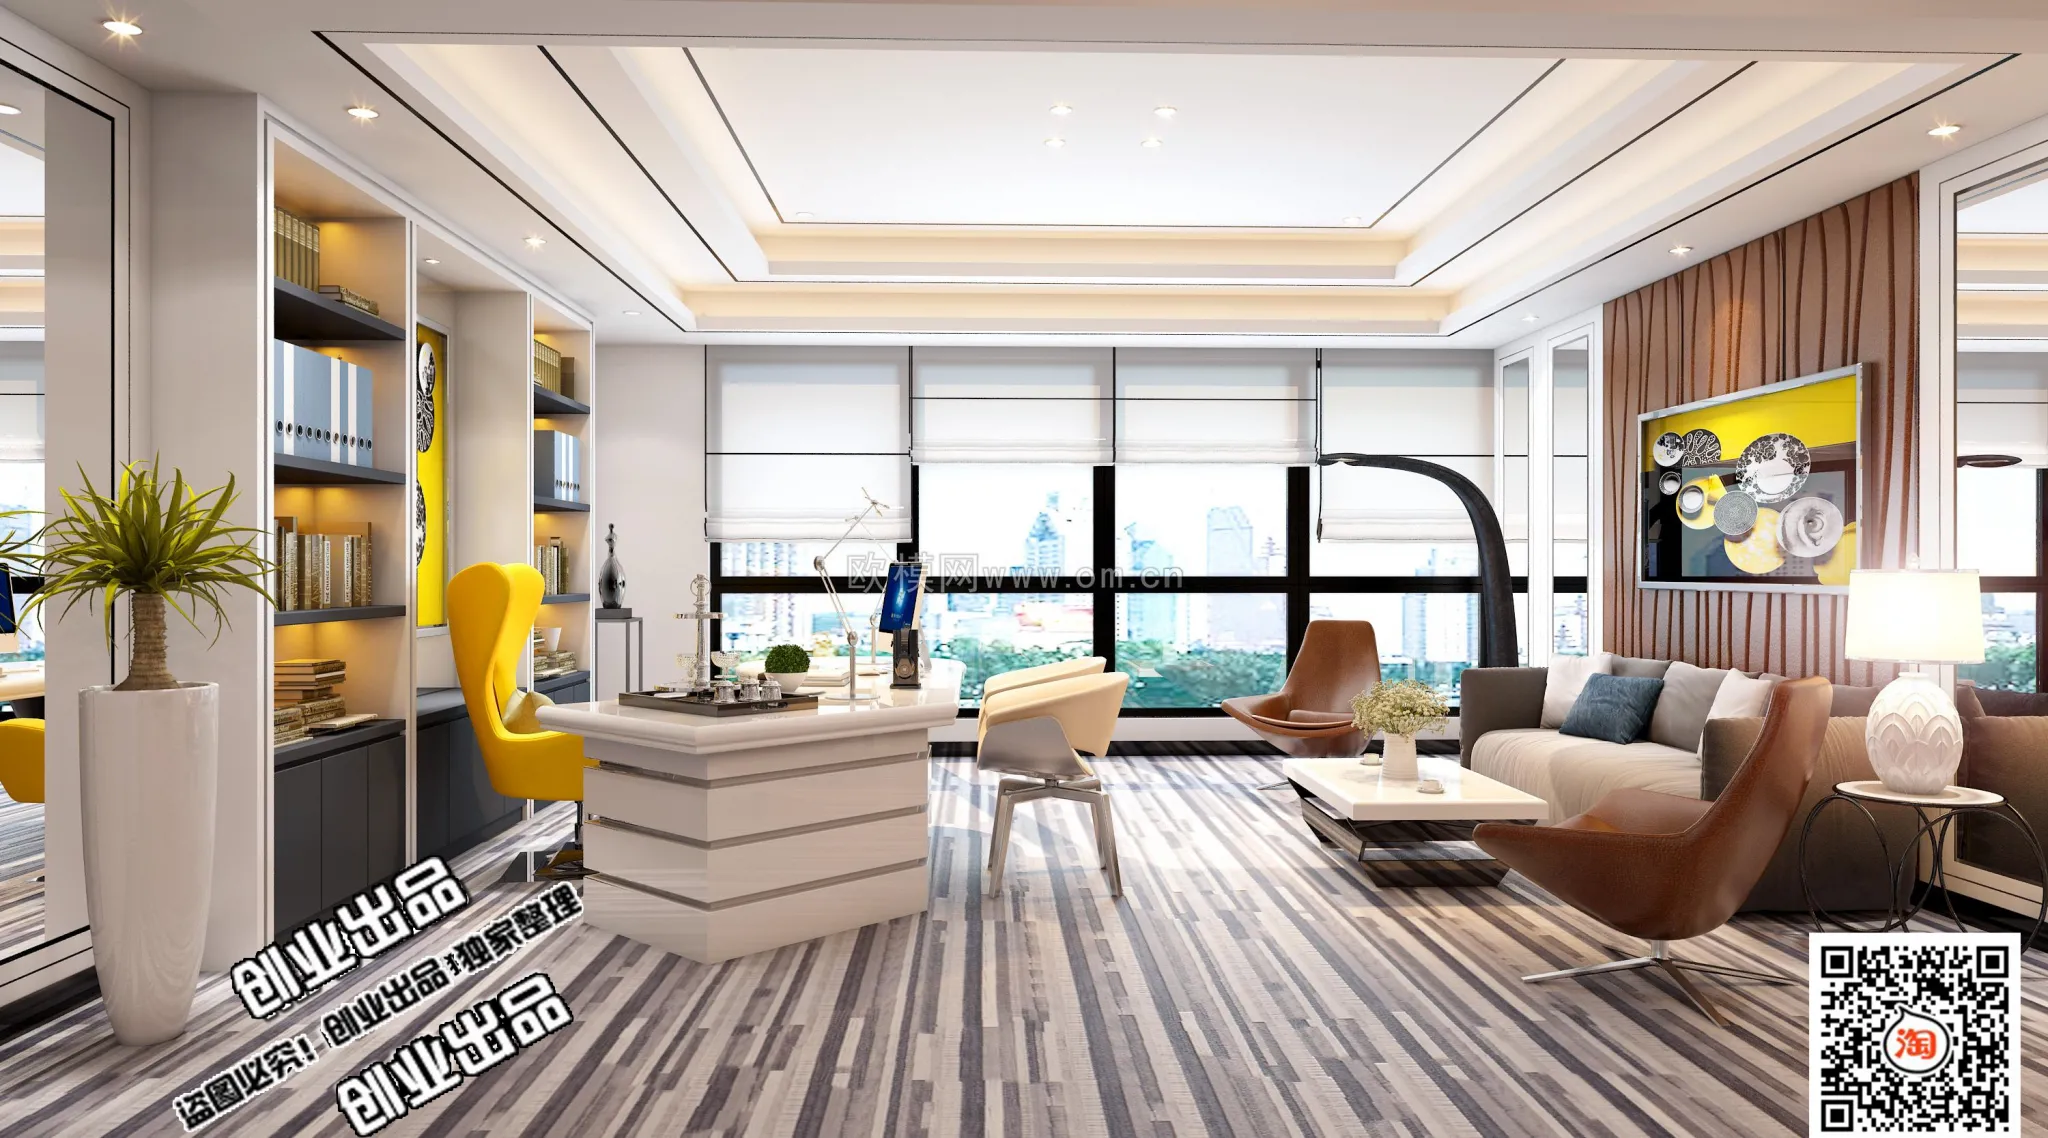 3D OFFICE INTERIOR (VRAY) – MANAGER ROOM 3D SCENES – 036